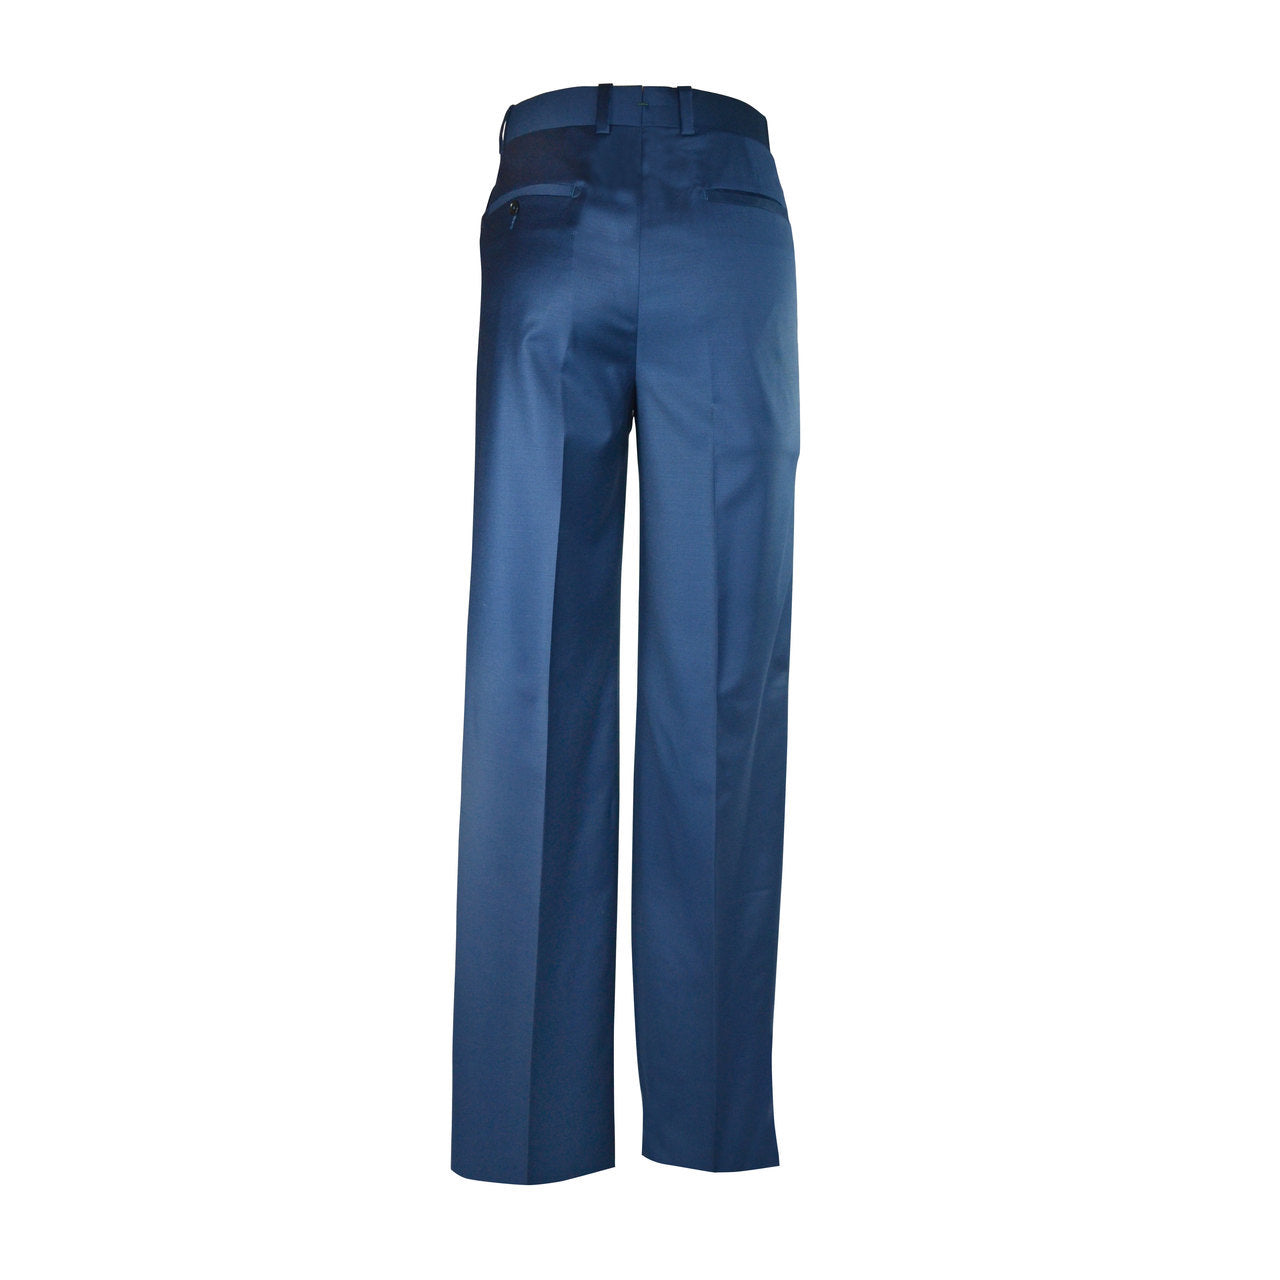 Newport Pleated Front Trouser - New Blue